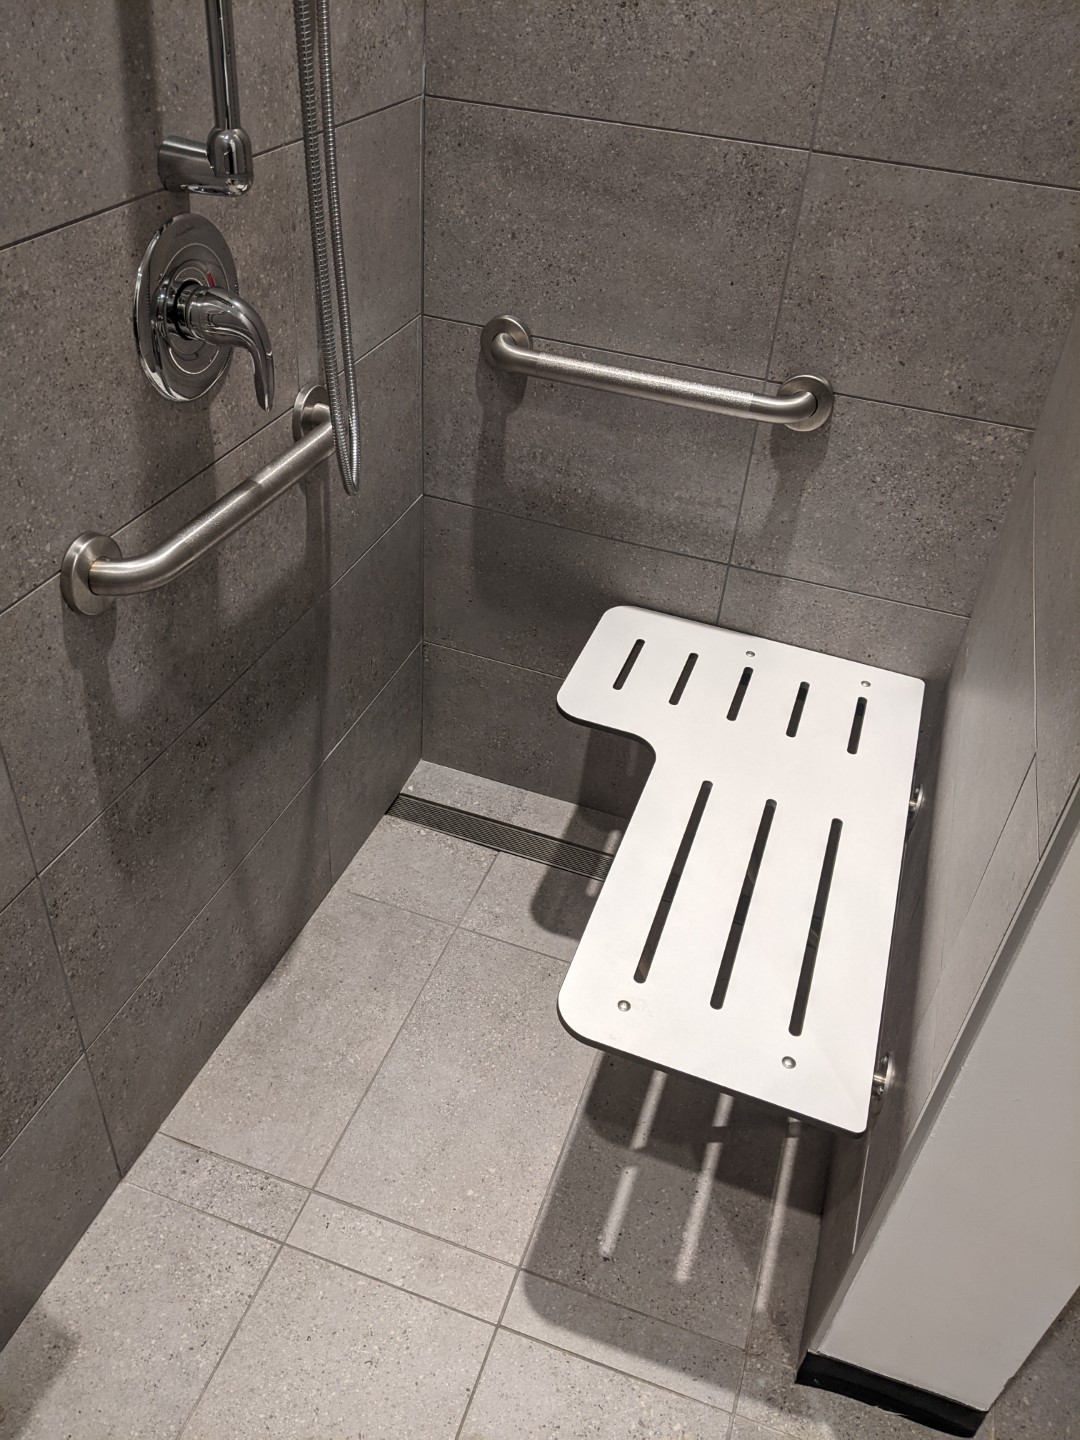 The full shower with shower head attached to the wall, folding bench pushed down.